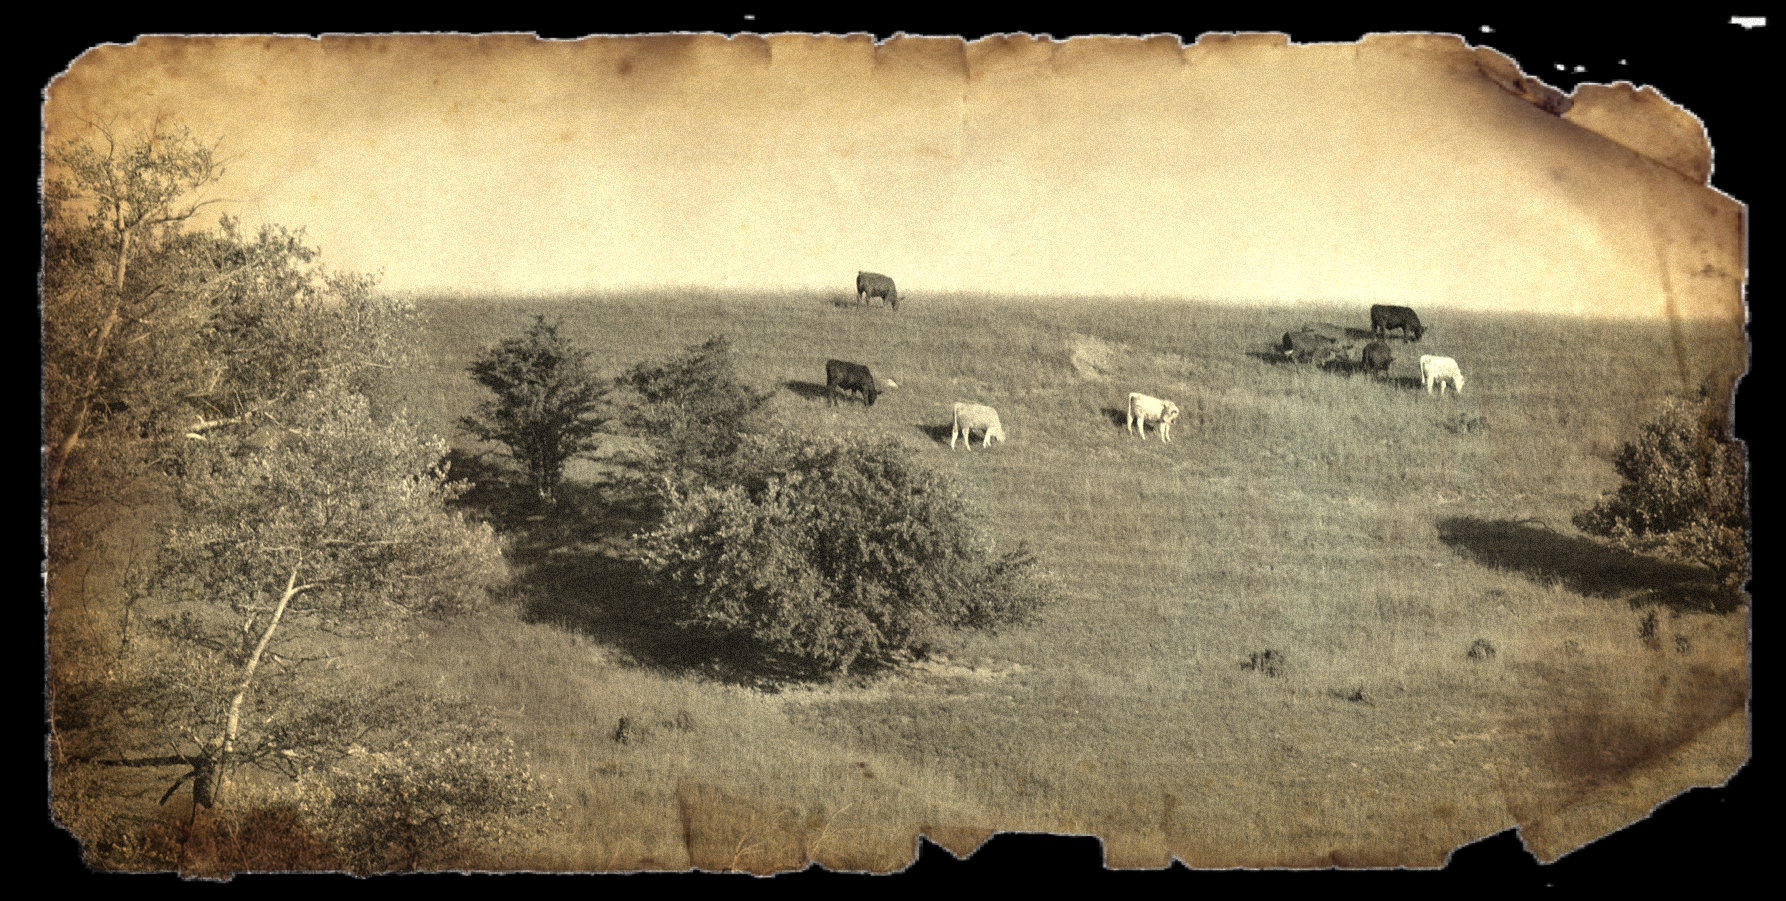 a herd of cattle on a field with trees in the background